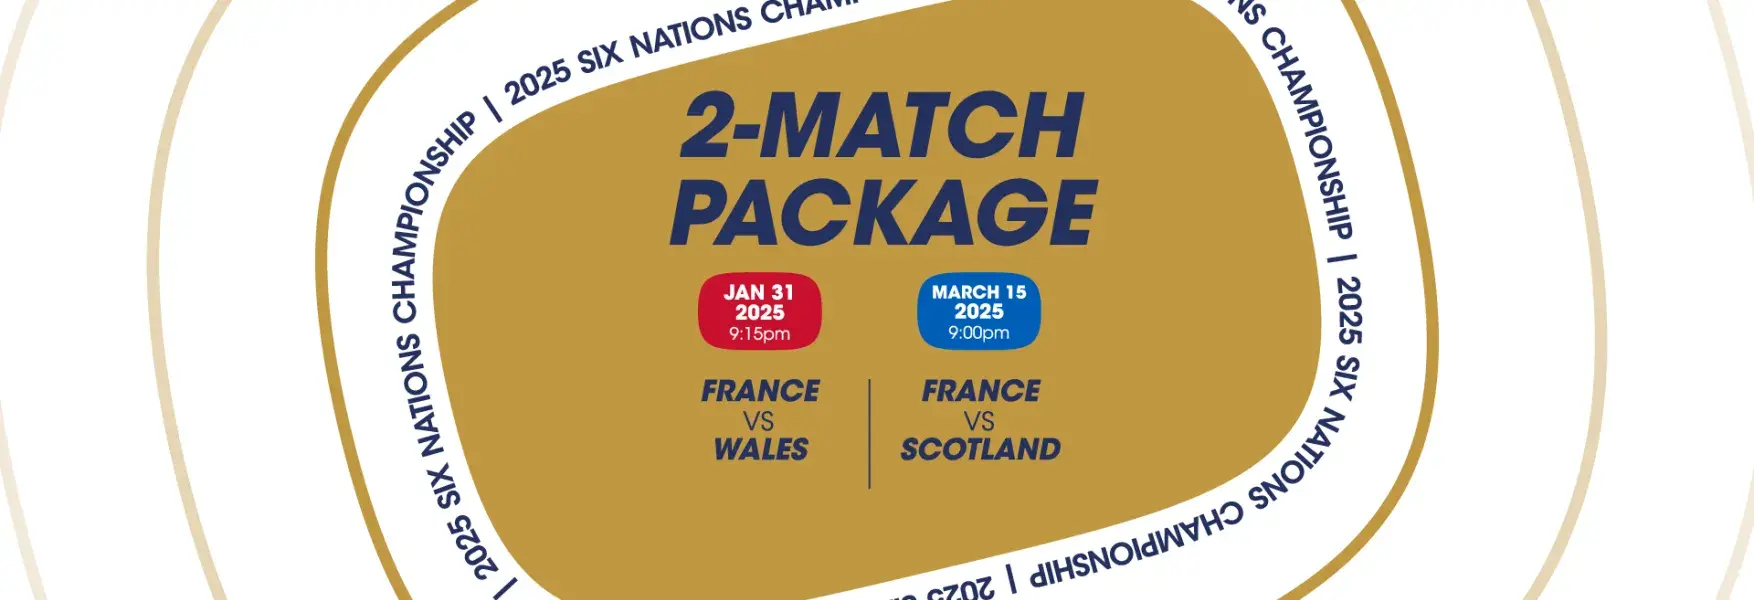 6_nations_championship_2025_2_match_package_rugby_vip_tickets_hospitality_banner_1920x660